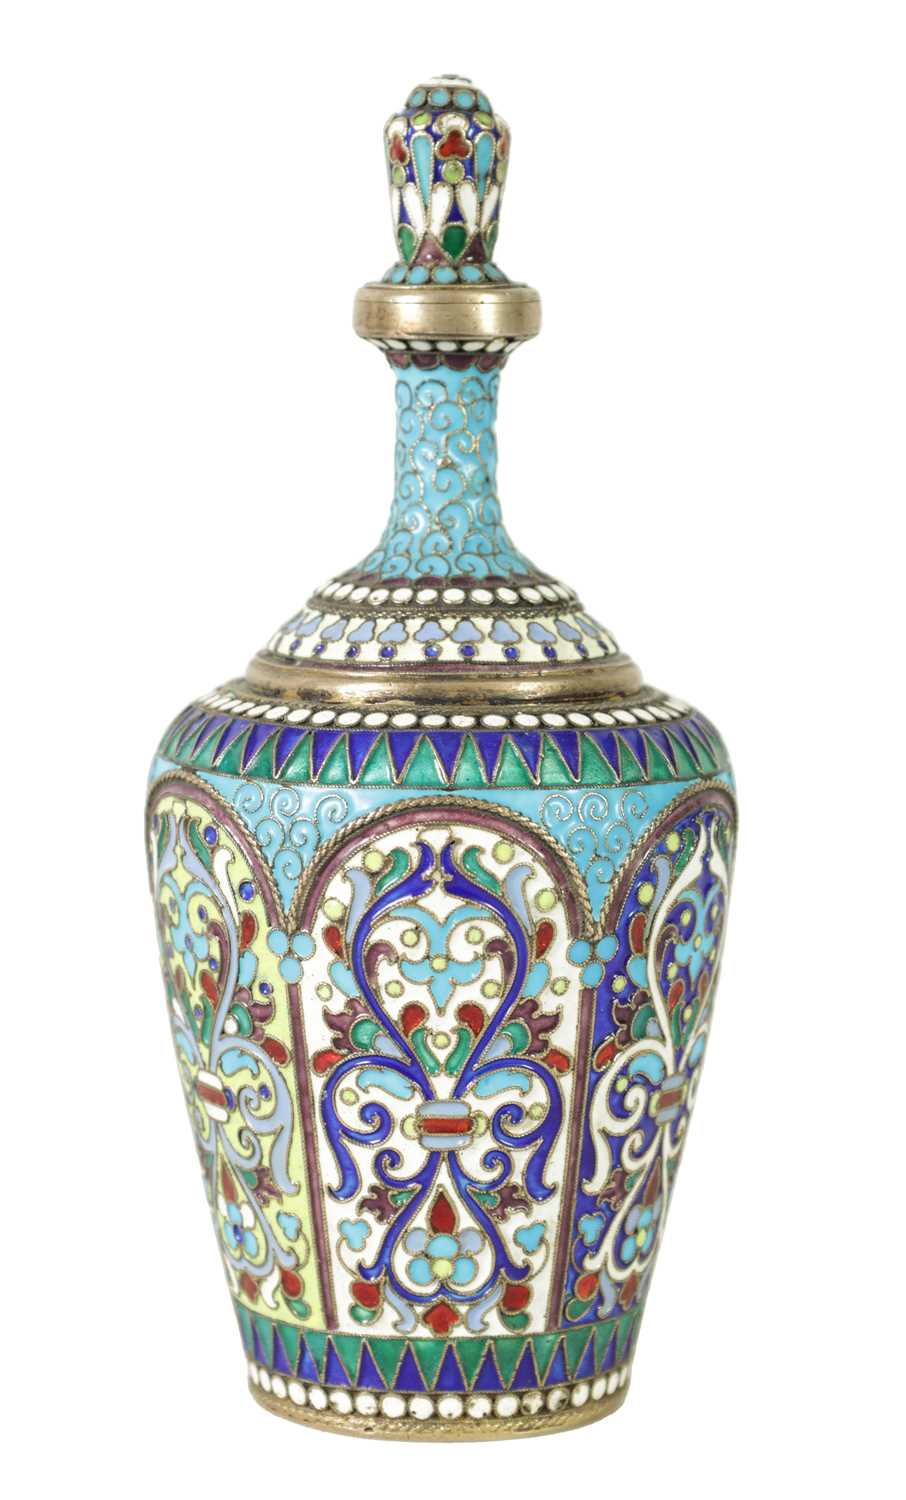 A 19TH-CENTURY RUSSIAN SILVER AND JEWELLED CLOISONNE ENAMEL BOTTLE VASE